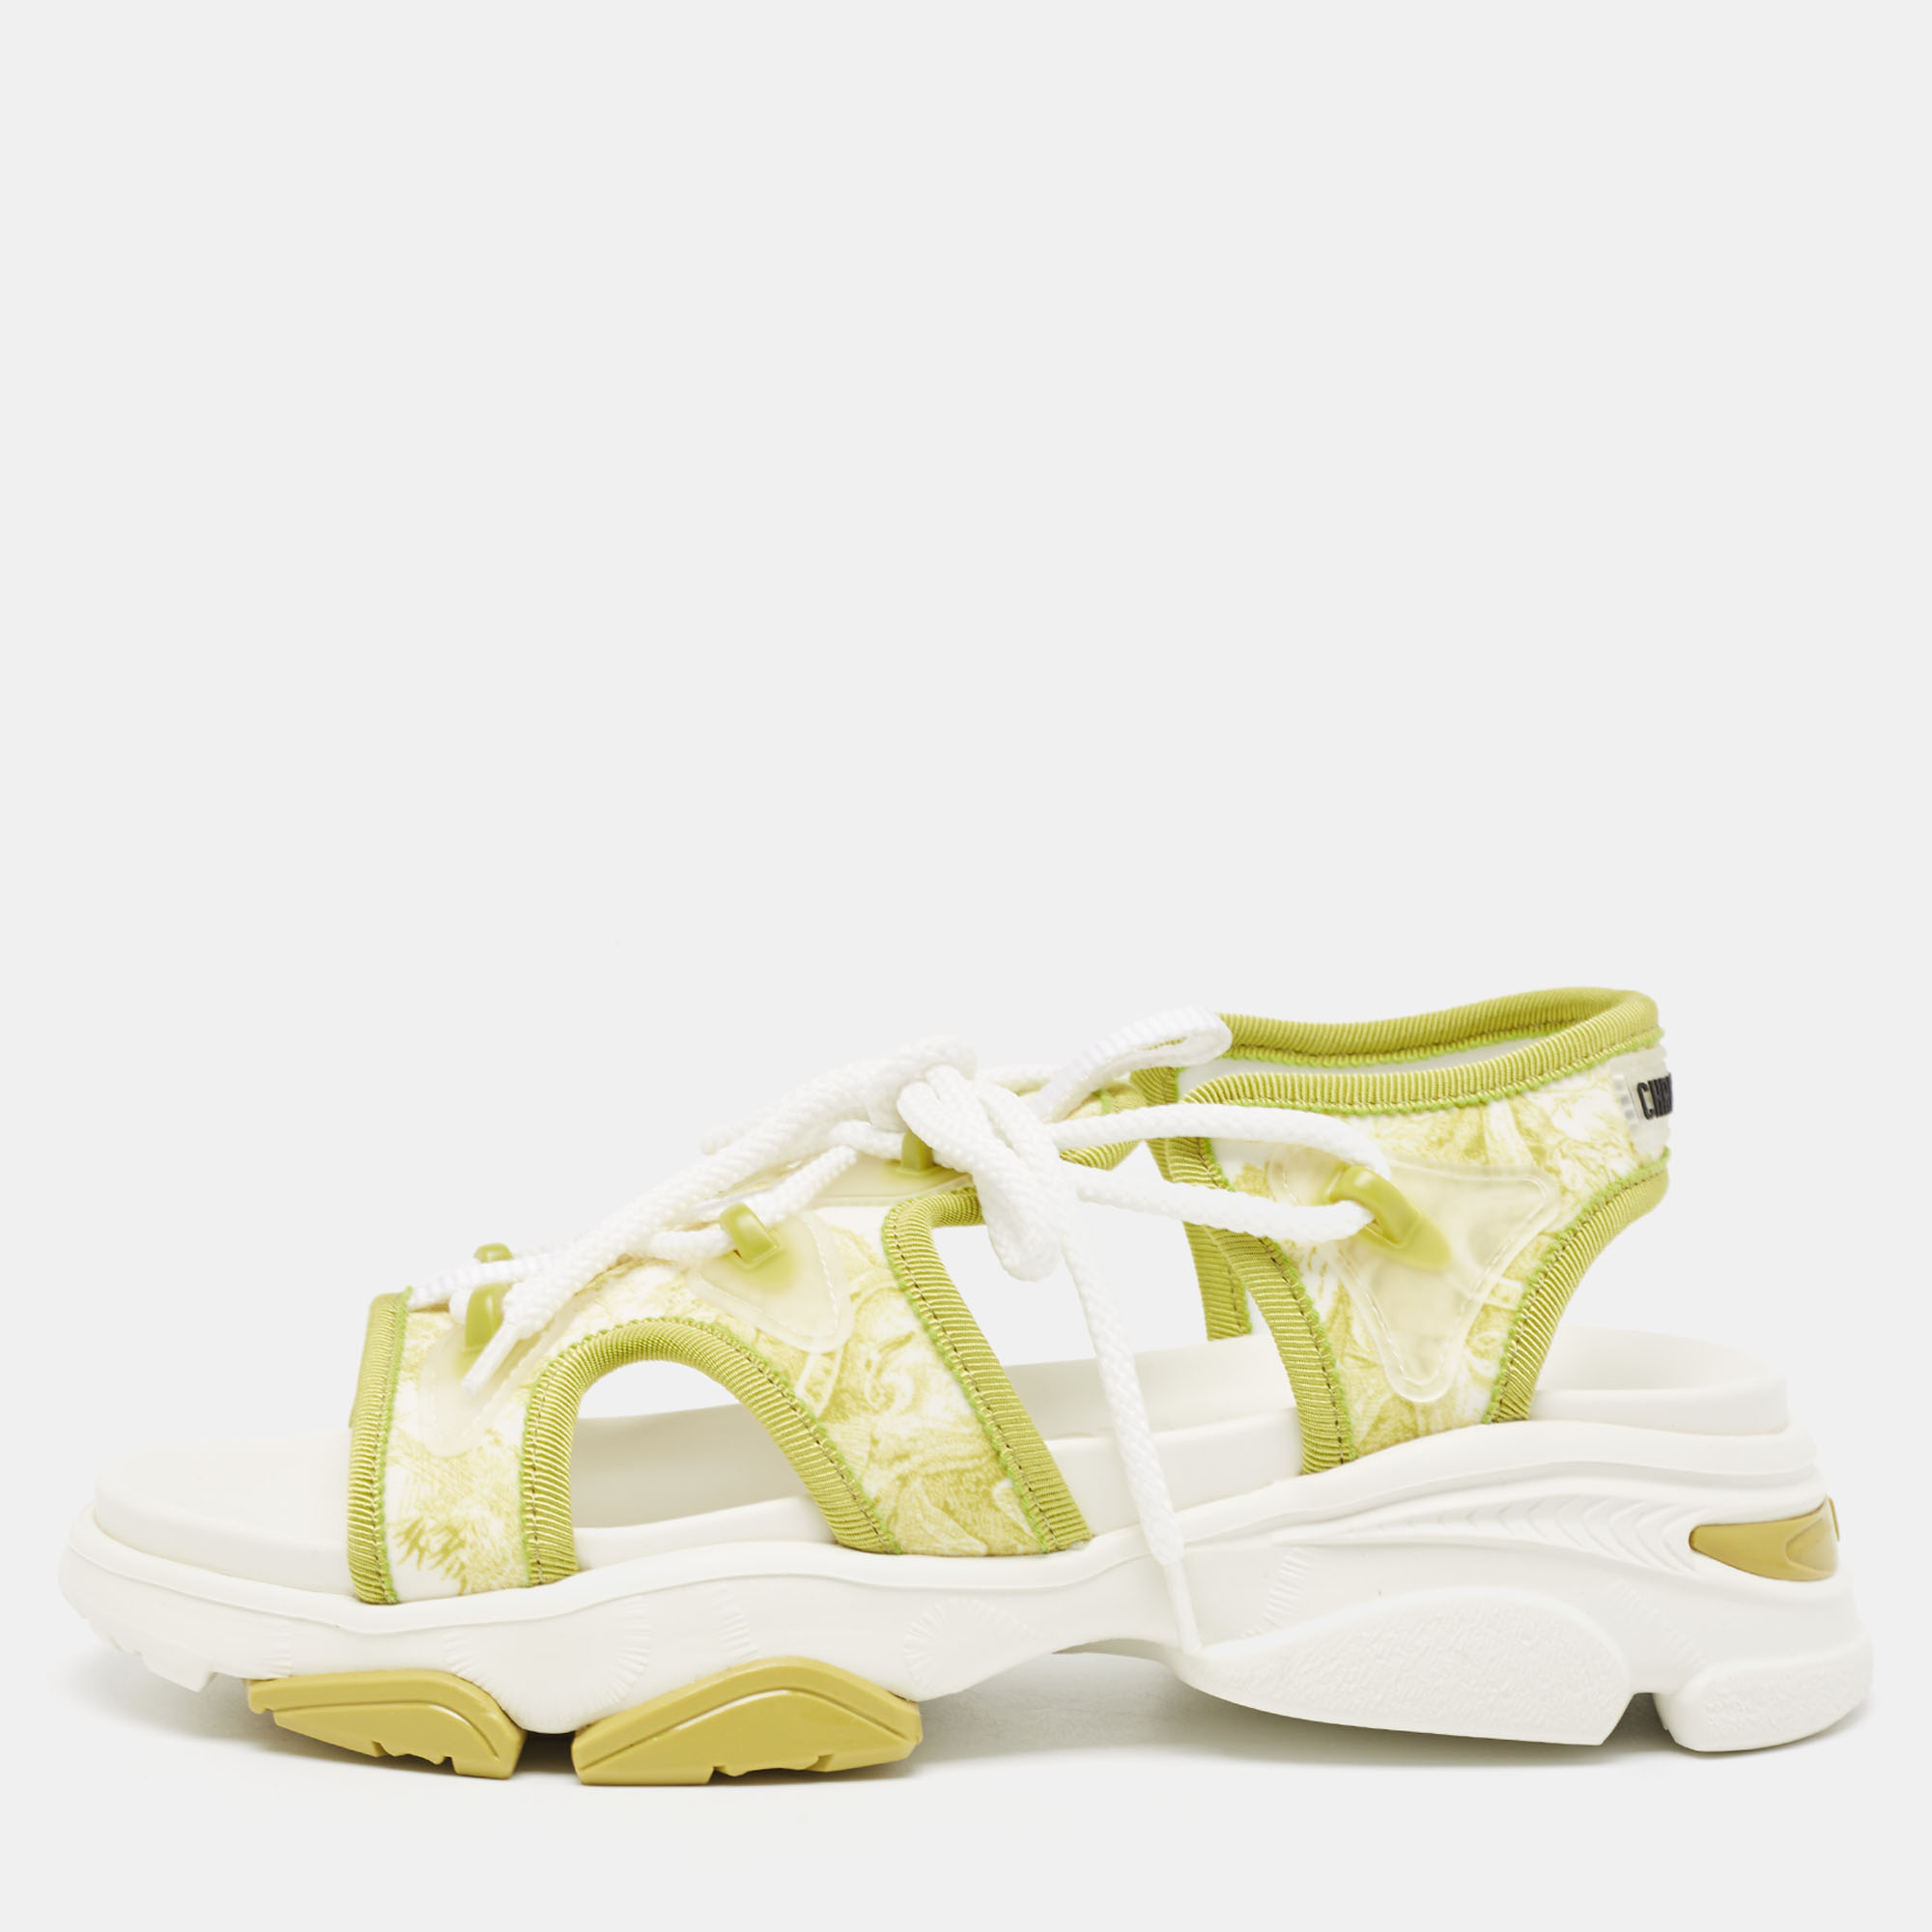 Dior Green/White Neoprene And PVC D-Connect Sandals Size 36.5